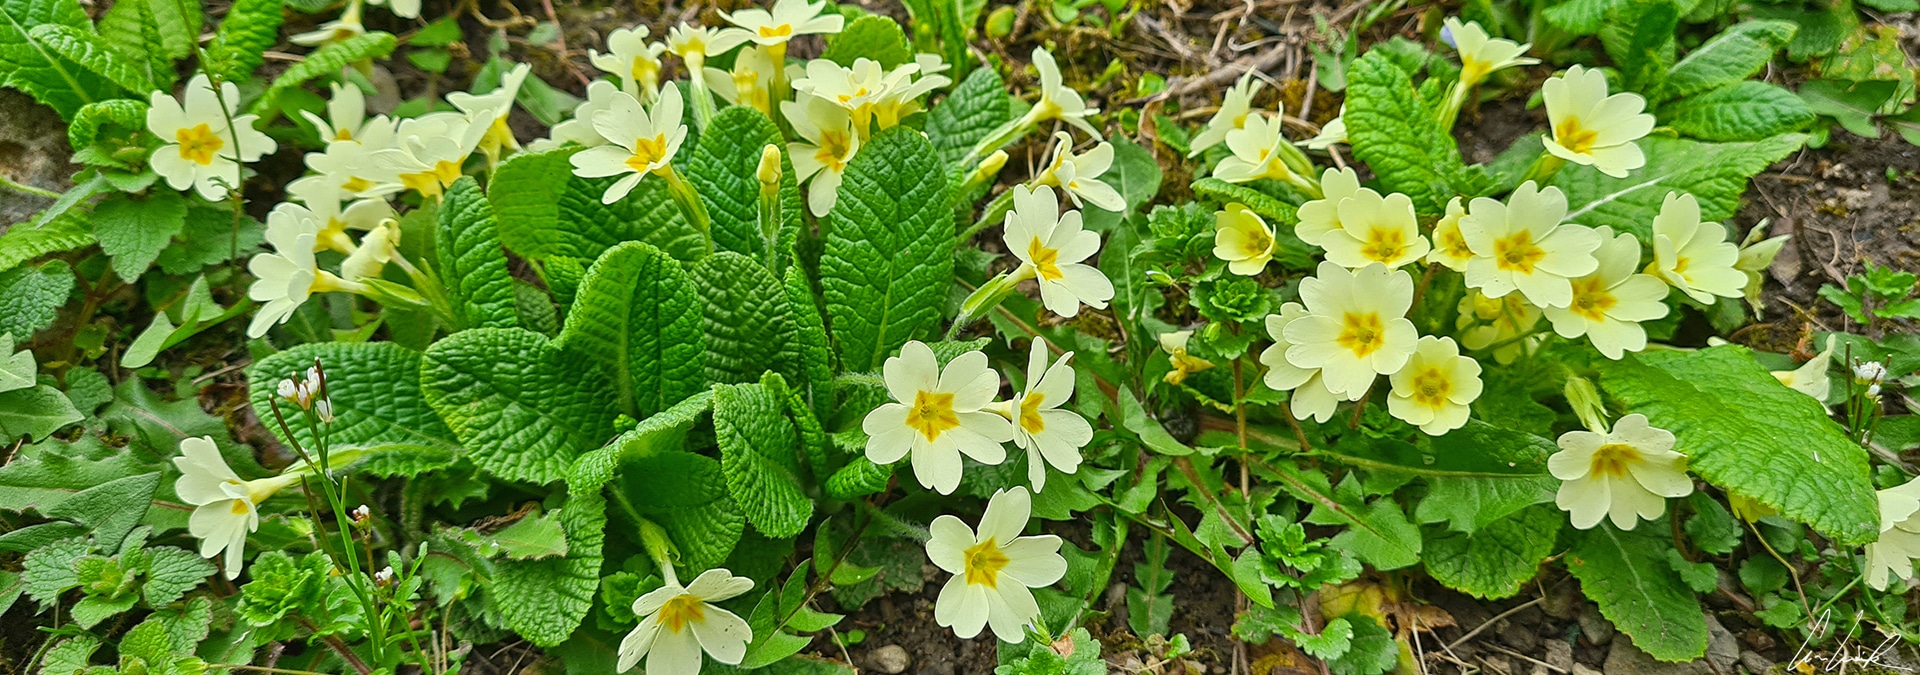 Blooming in early spring, the primroses are flowers with pale to deep yellow with darker yellow-orange centers color. Primroses are low-growing plants with rough, tongue-like leaves that grow in a rosette.